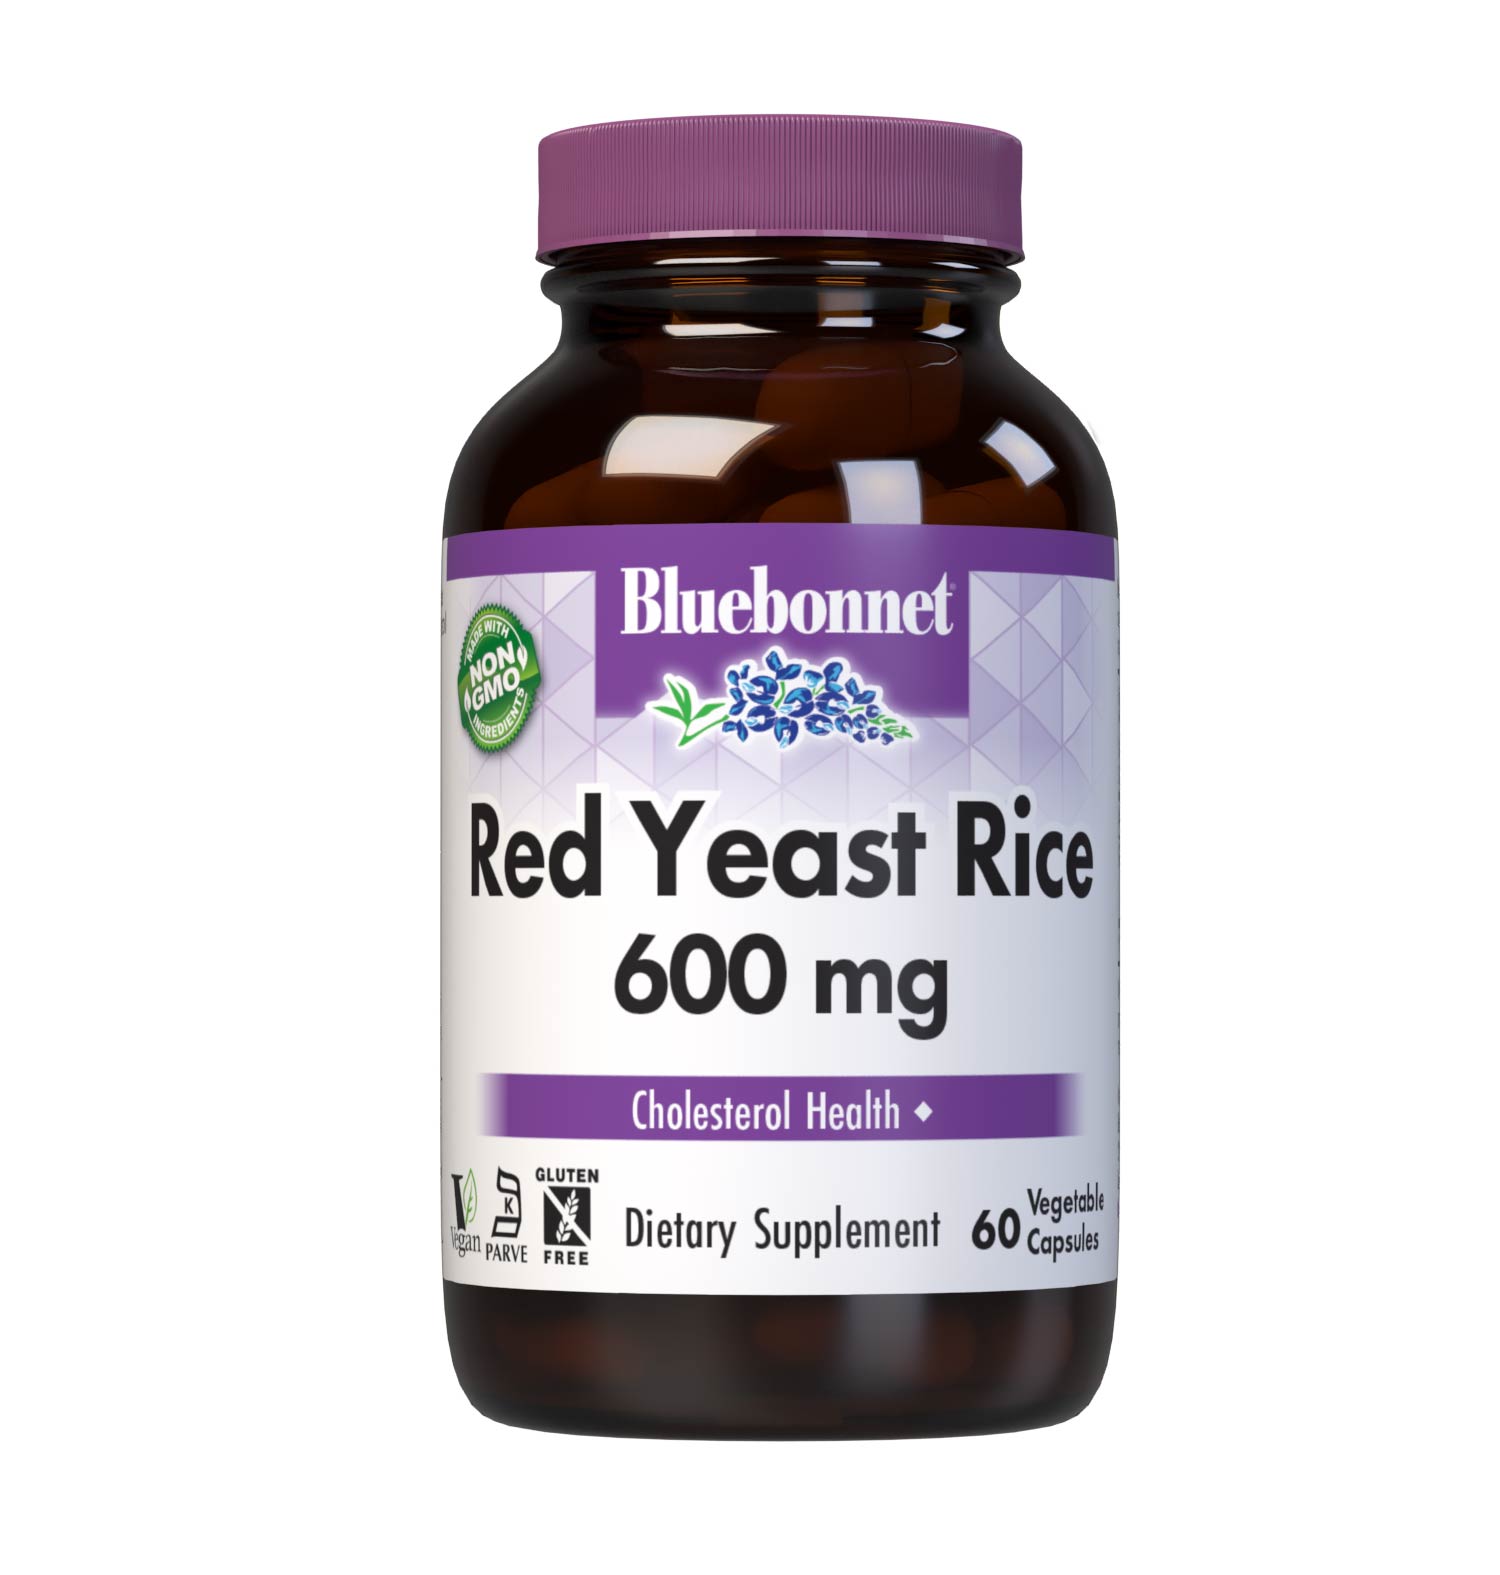 Bluebonnet’s Red Yeast Rice 600 mg 60 Vegetable Capsules are formulated with red yeast rice, which is the product of rice fermentation with various strains of the yeast, Monascus purpureus. Red yeast rice may help to maintain cholesterol levels that are already within the normal range. #size_60 count